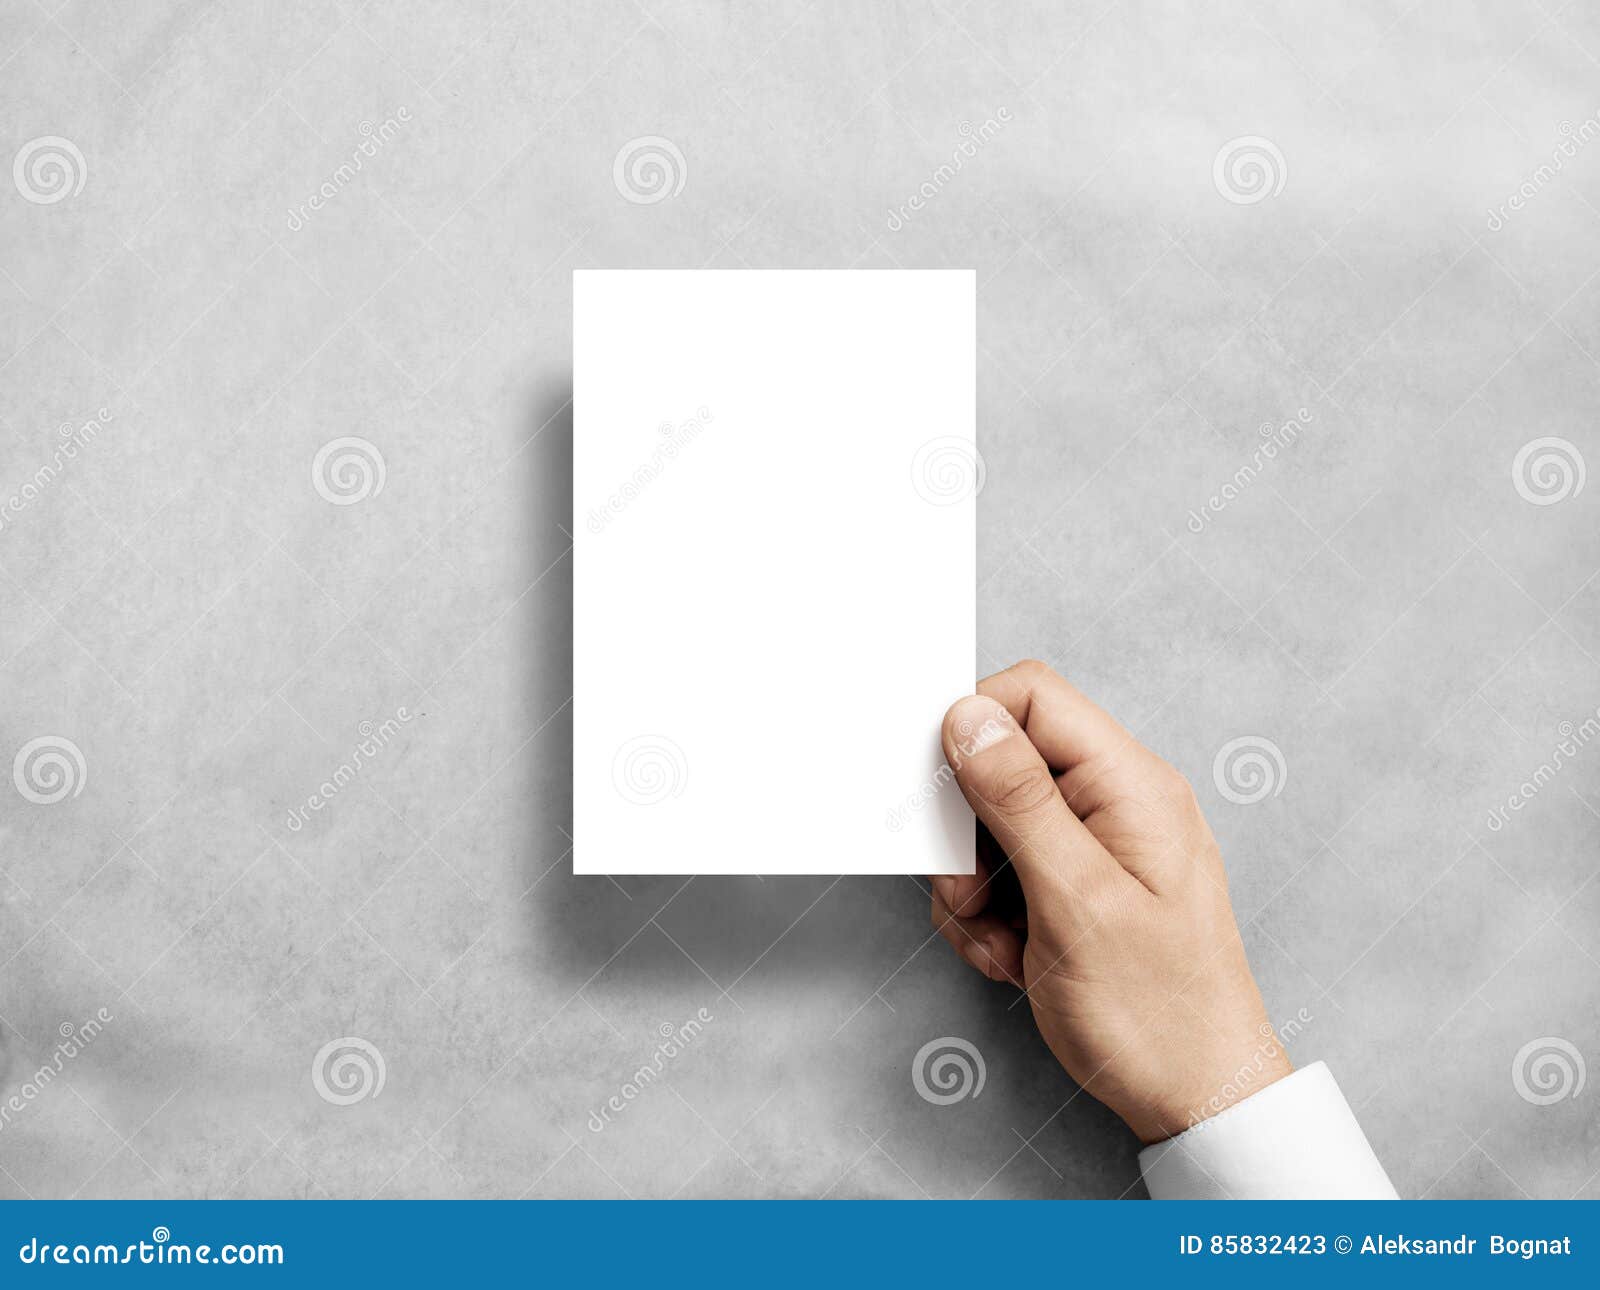 Download 871 Mockup Postcard Vertical Photos Free Royalty Free Stock Photos From Dreamstime